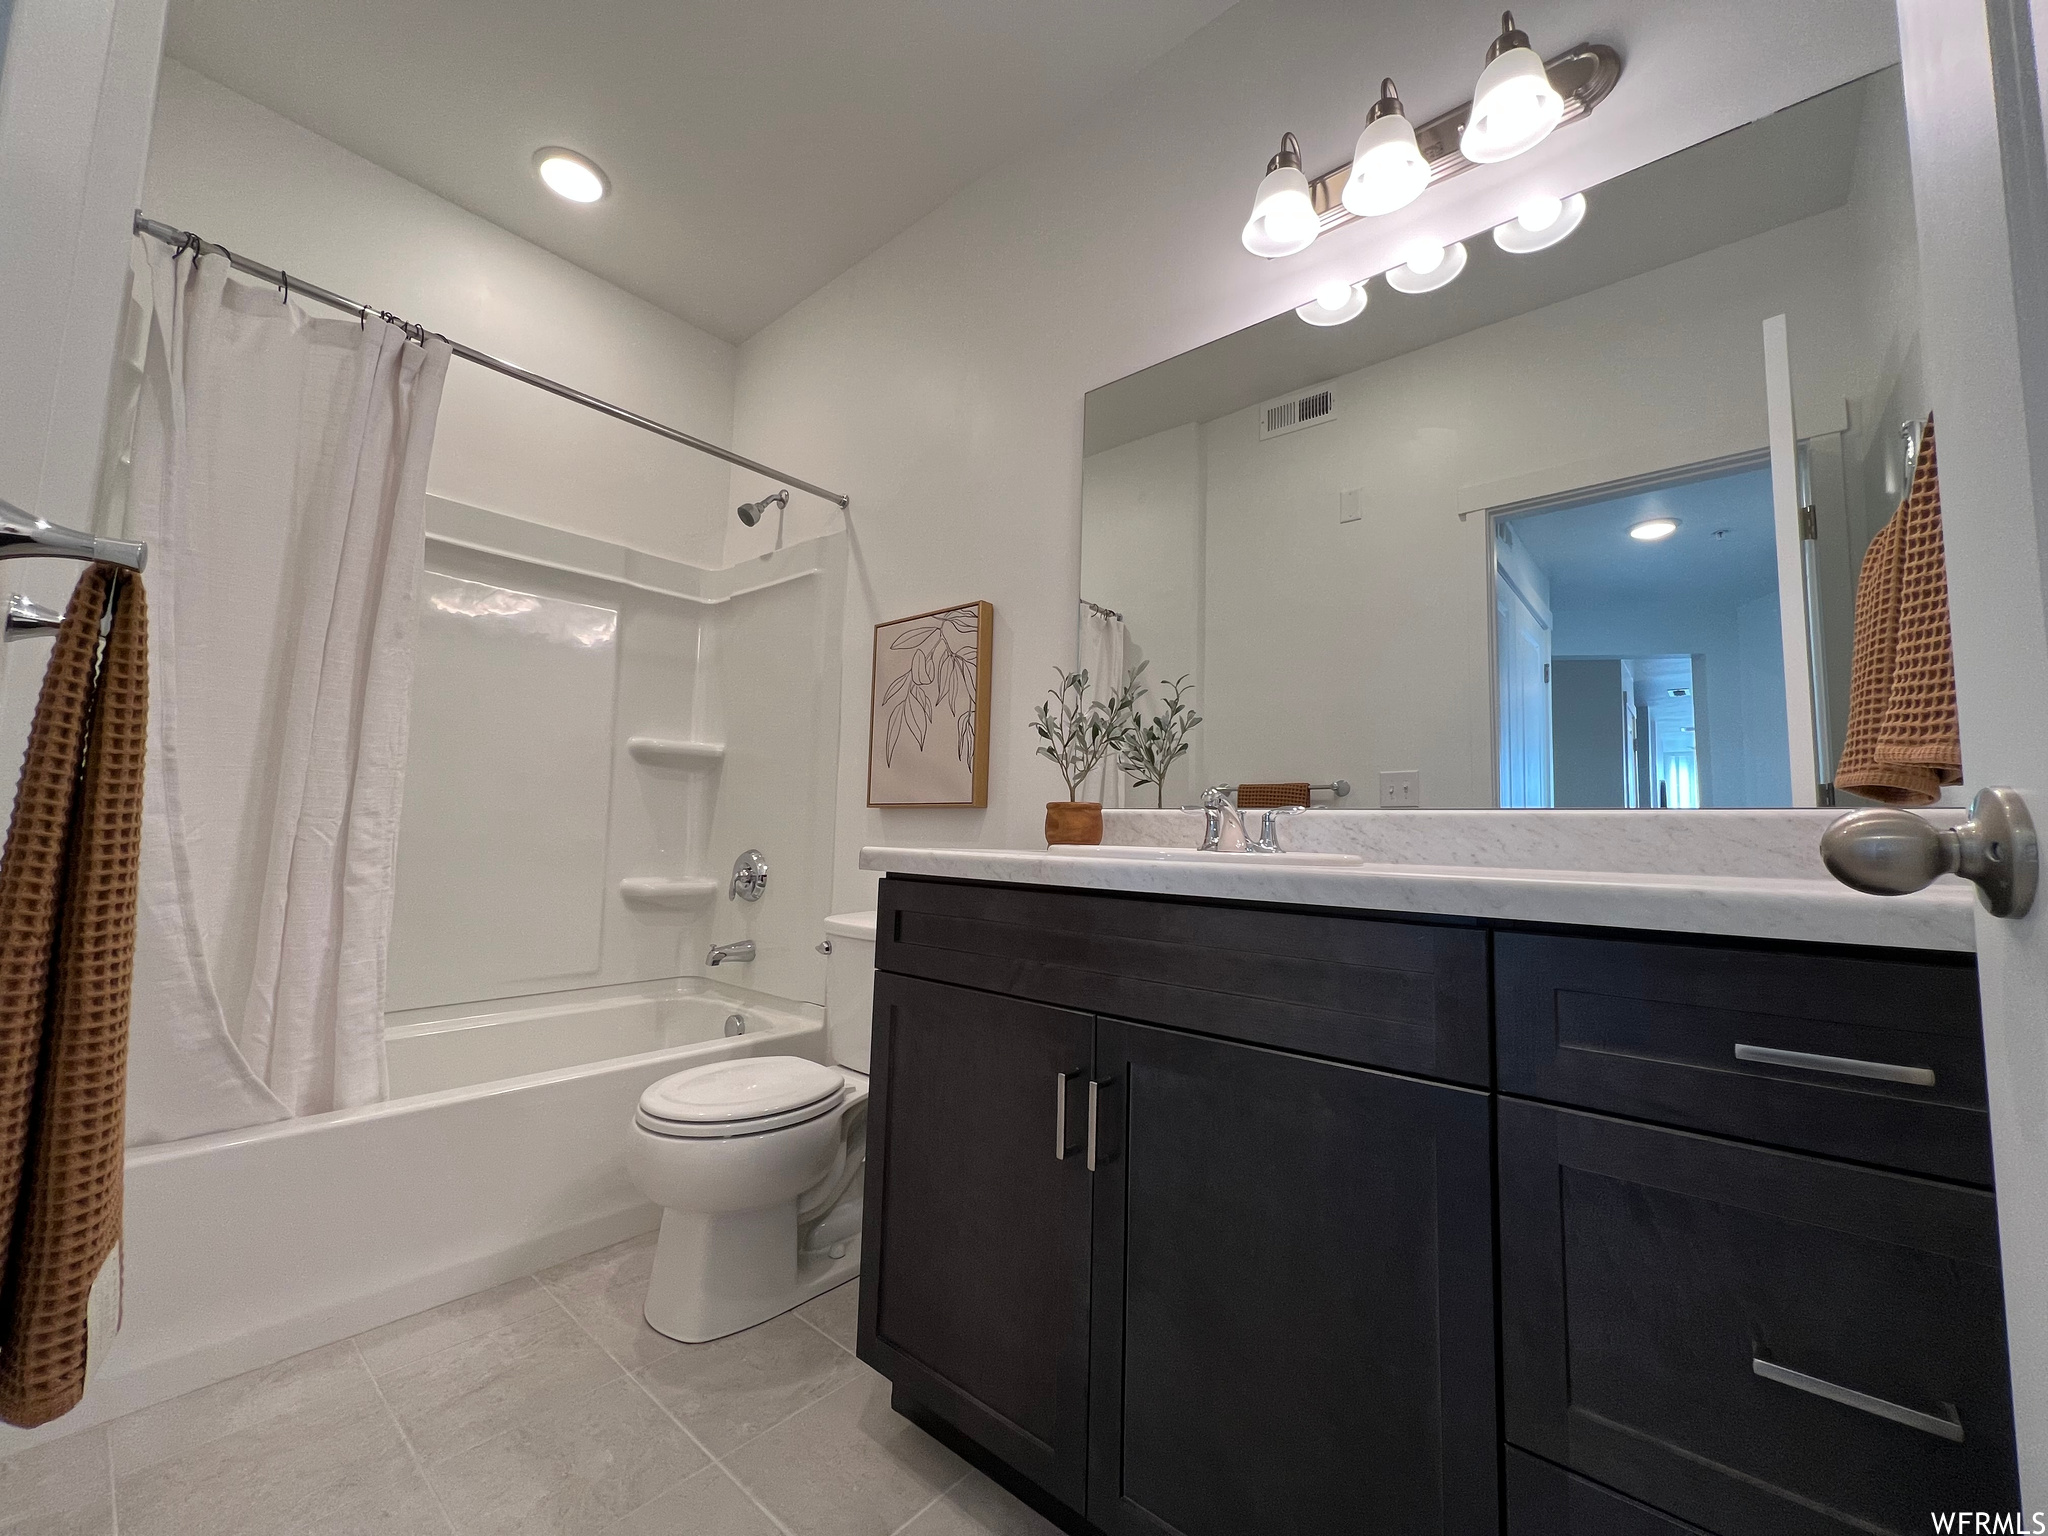 Full bathroom with toilet, vanity, tile floors, and shower / tub combo with curtain